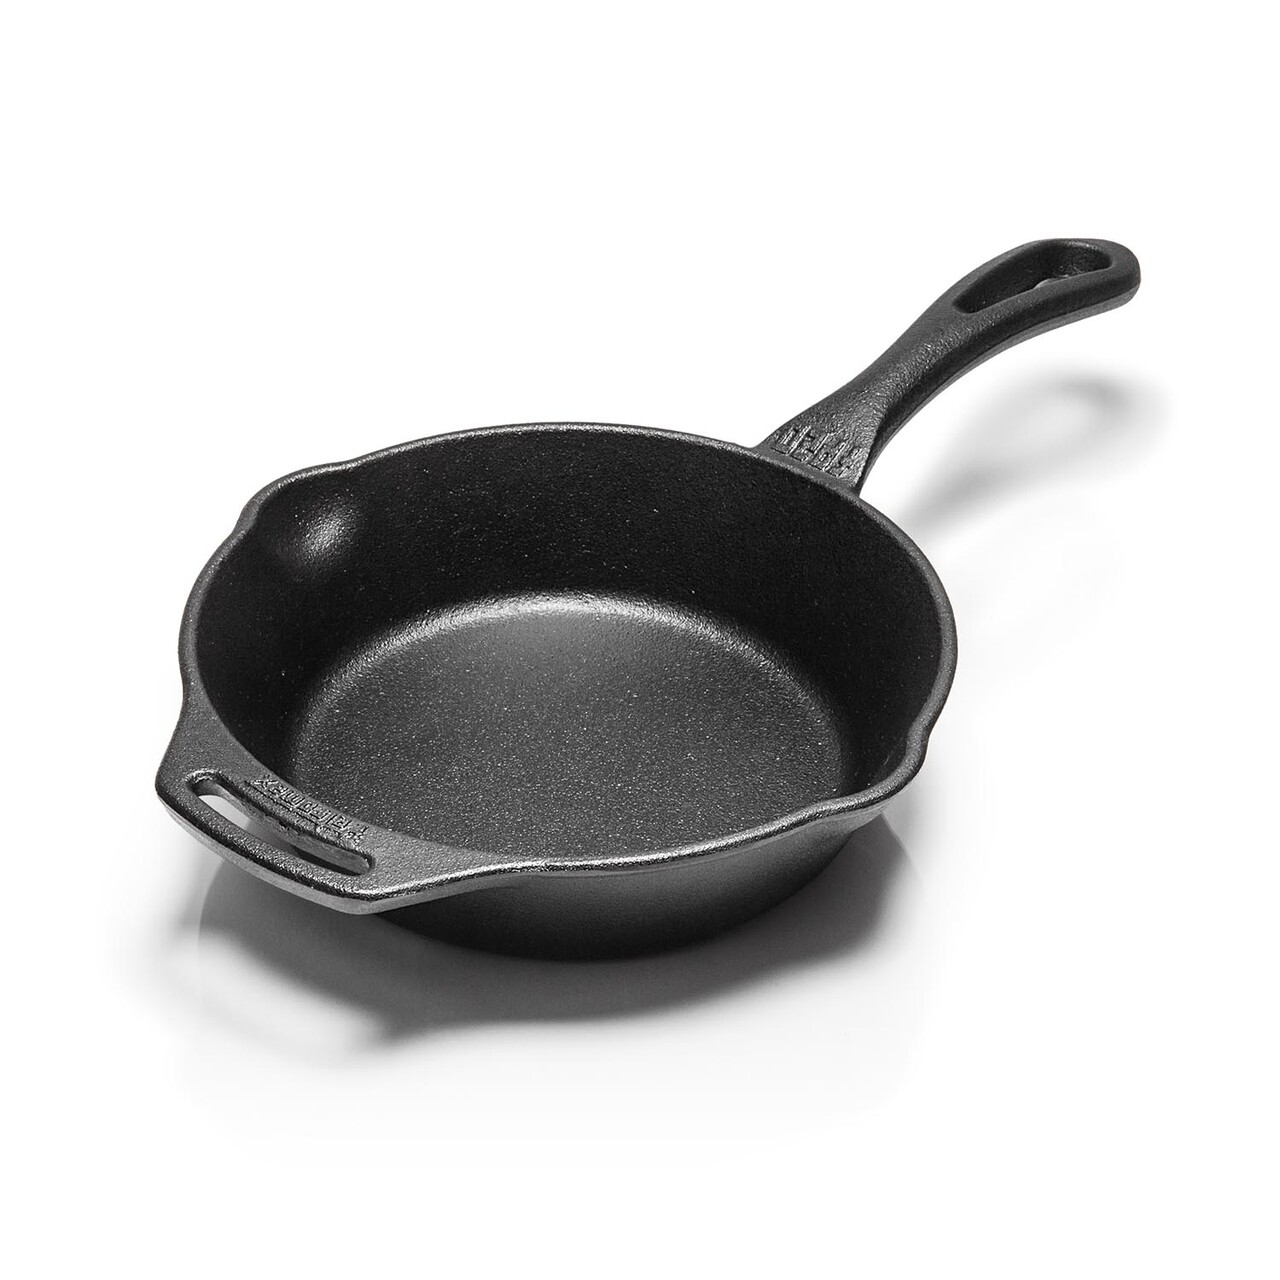 Petromax Fire Skillet Fp20 With One Pan Handle